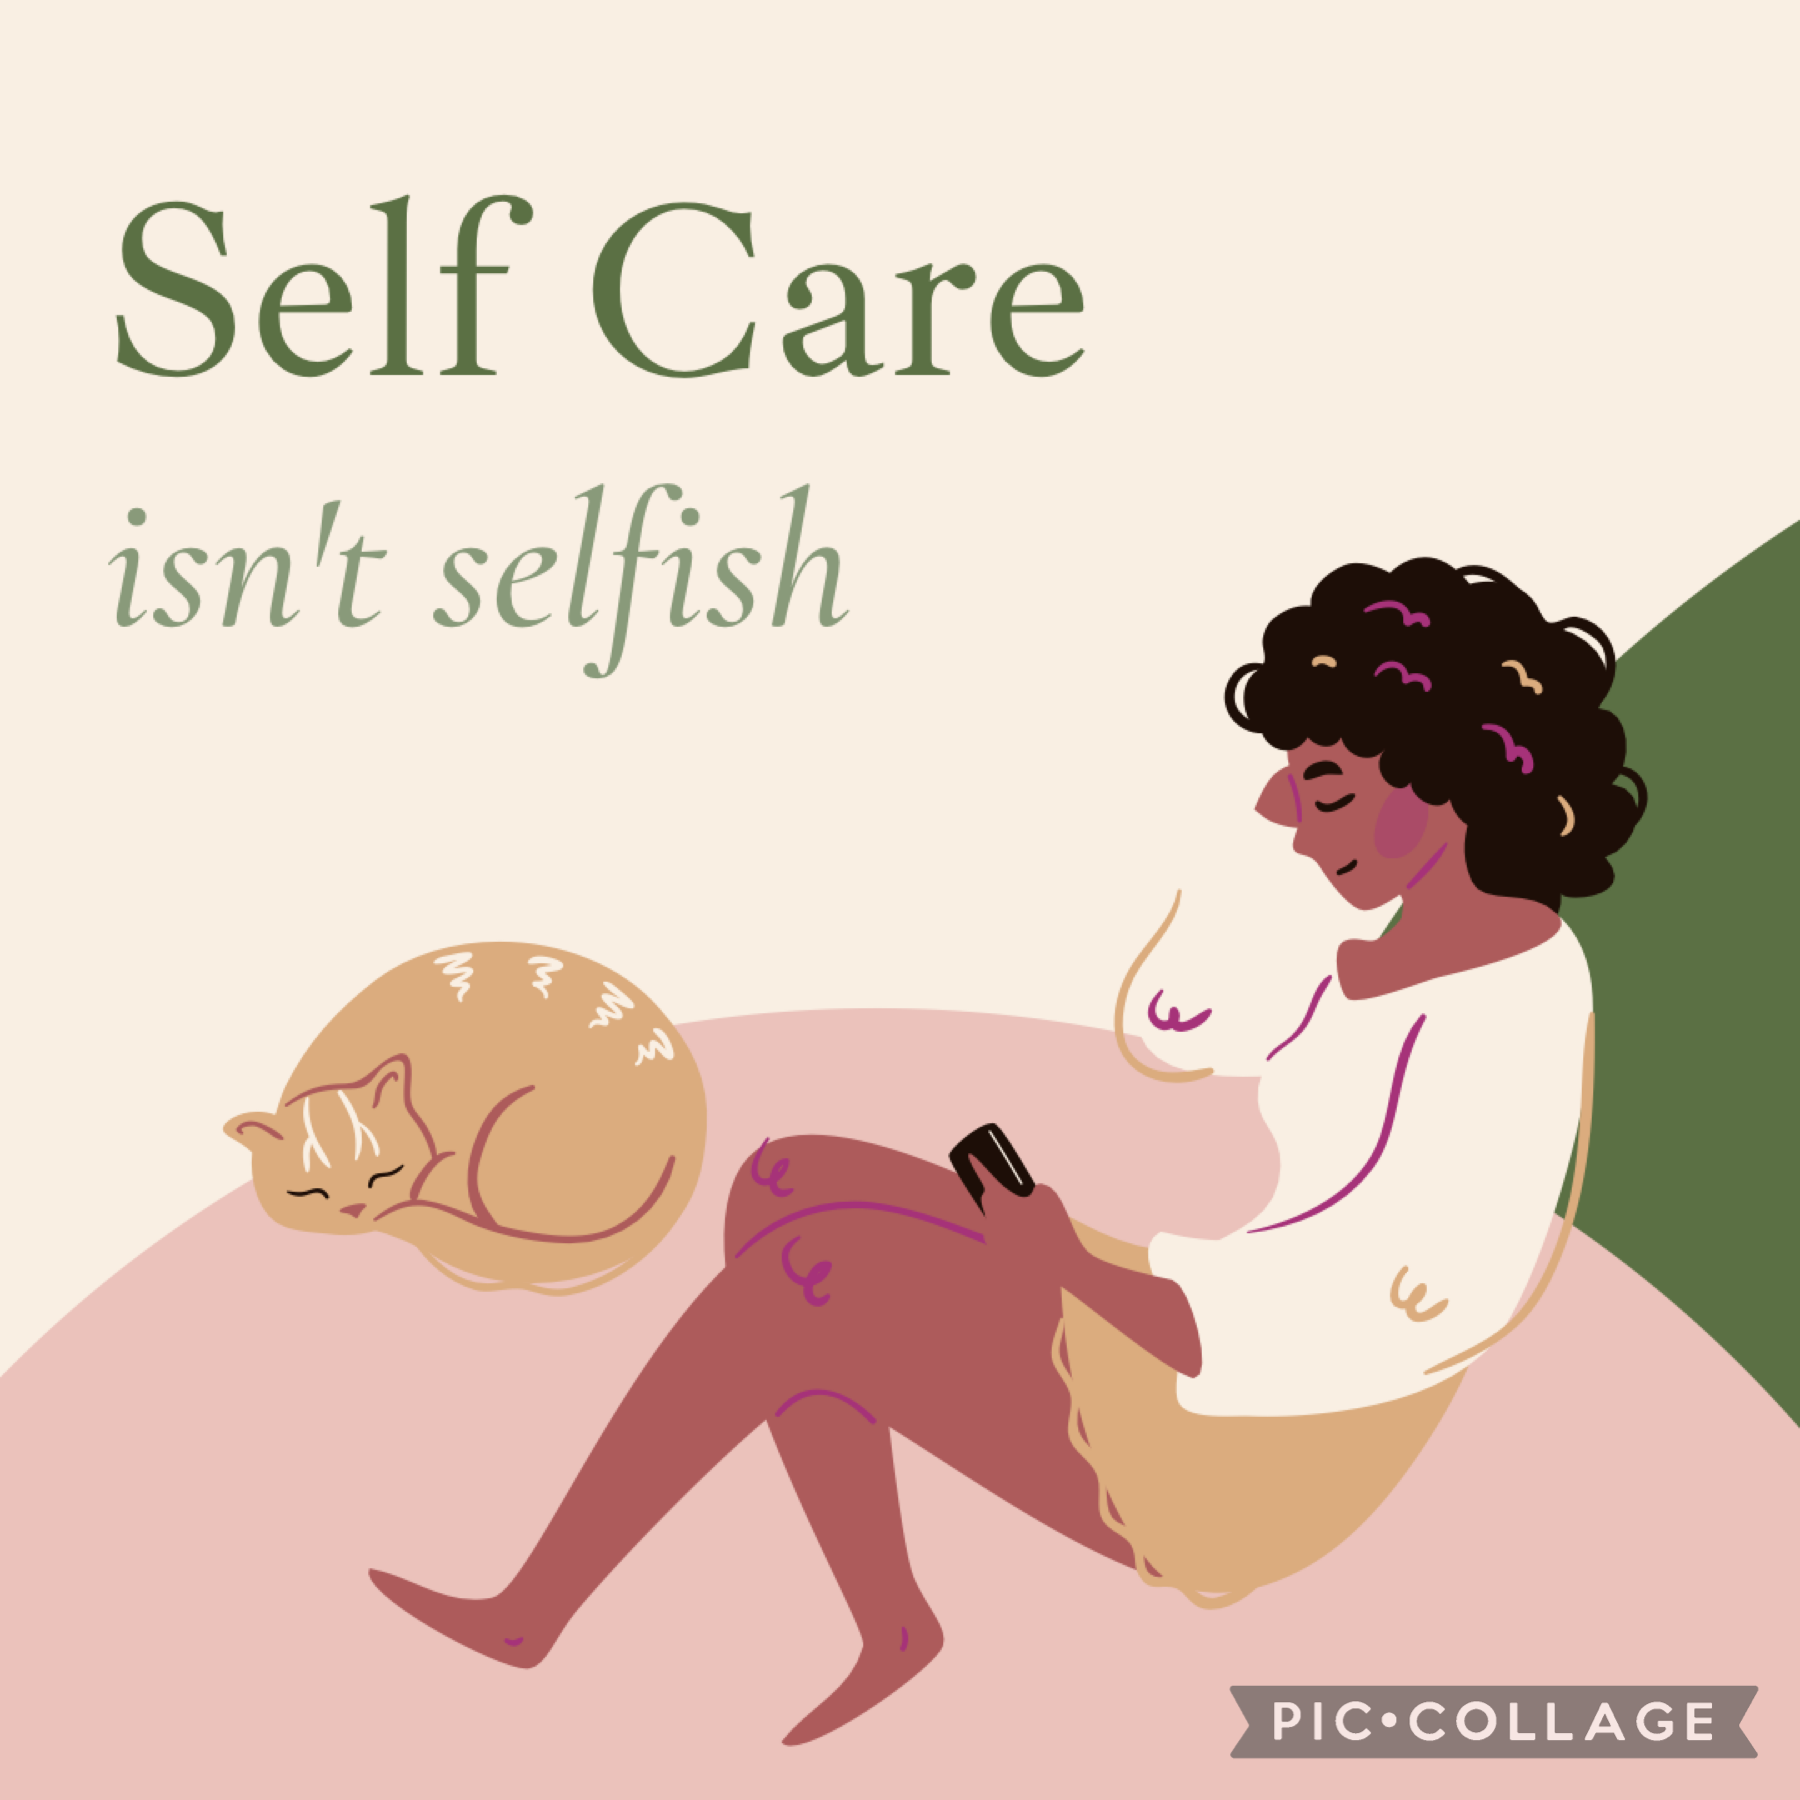 self care isn’t selfish 💗 
mental health check-in: how are you doing? what, if anything, are you feeling stressed about today? 
reward yourself today!! you deserve it <3
template: canva 